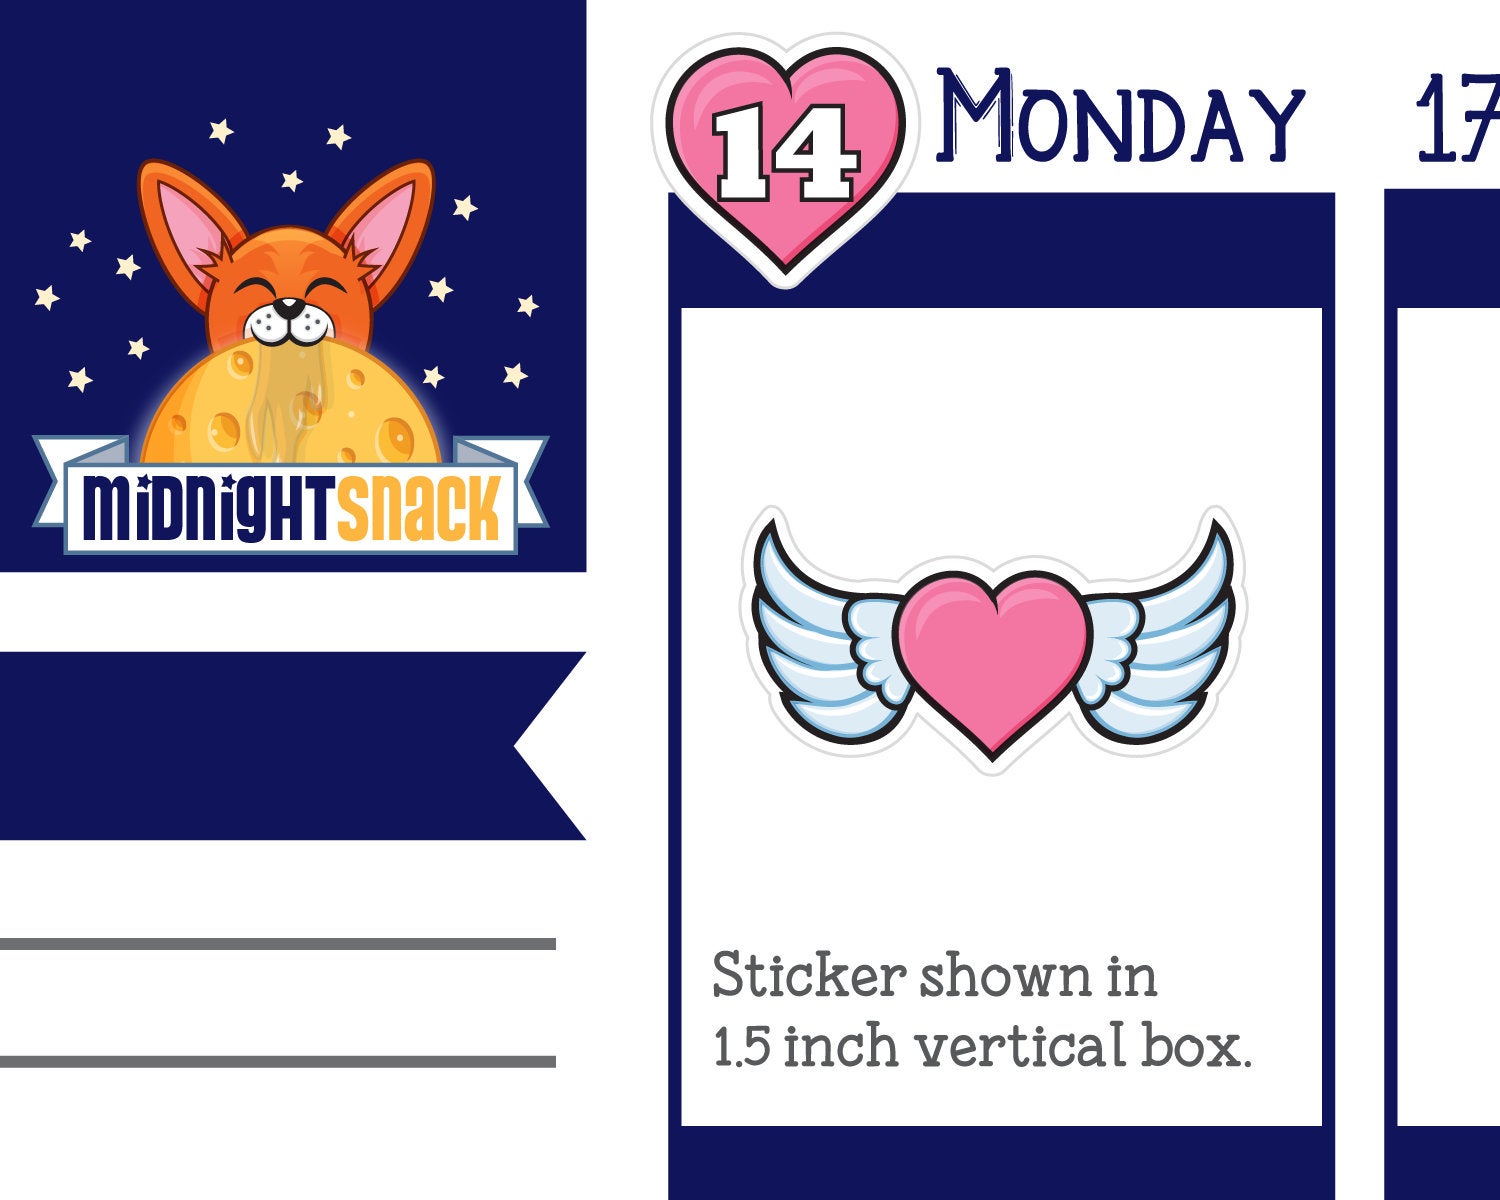 Valentine’s Day Heart: February or Love Date Cover Planner Stickers Midnight Snack Planner